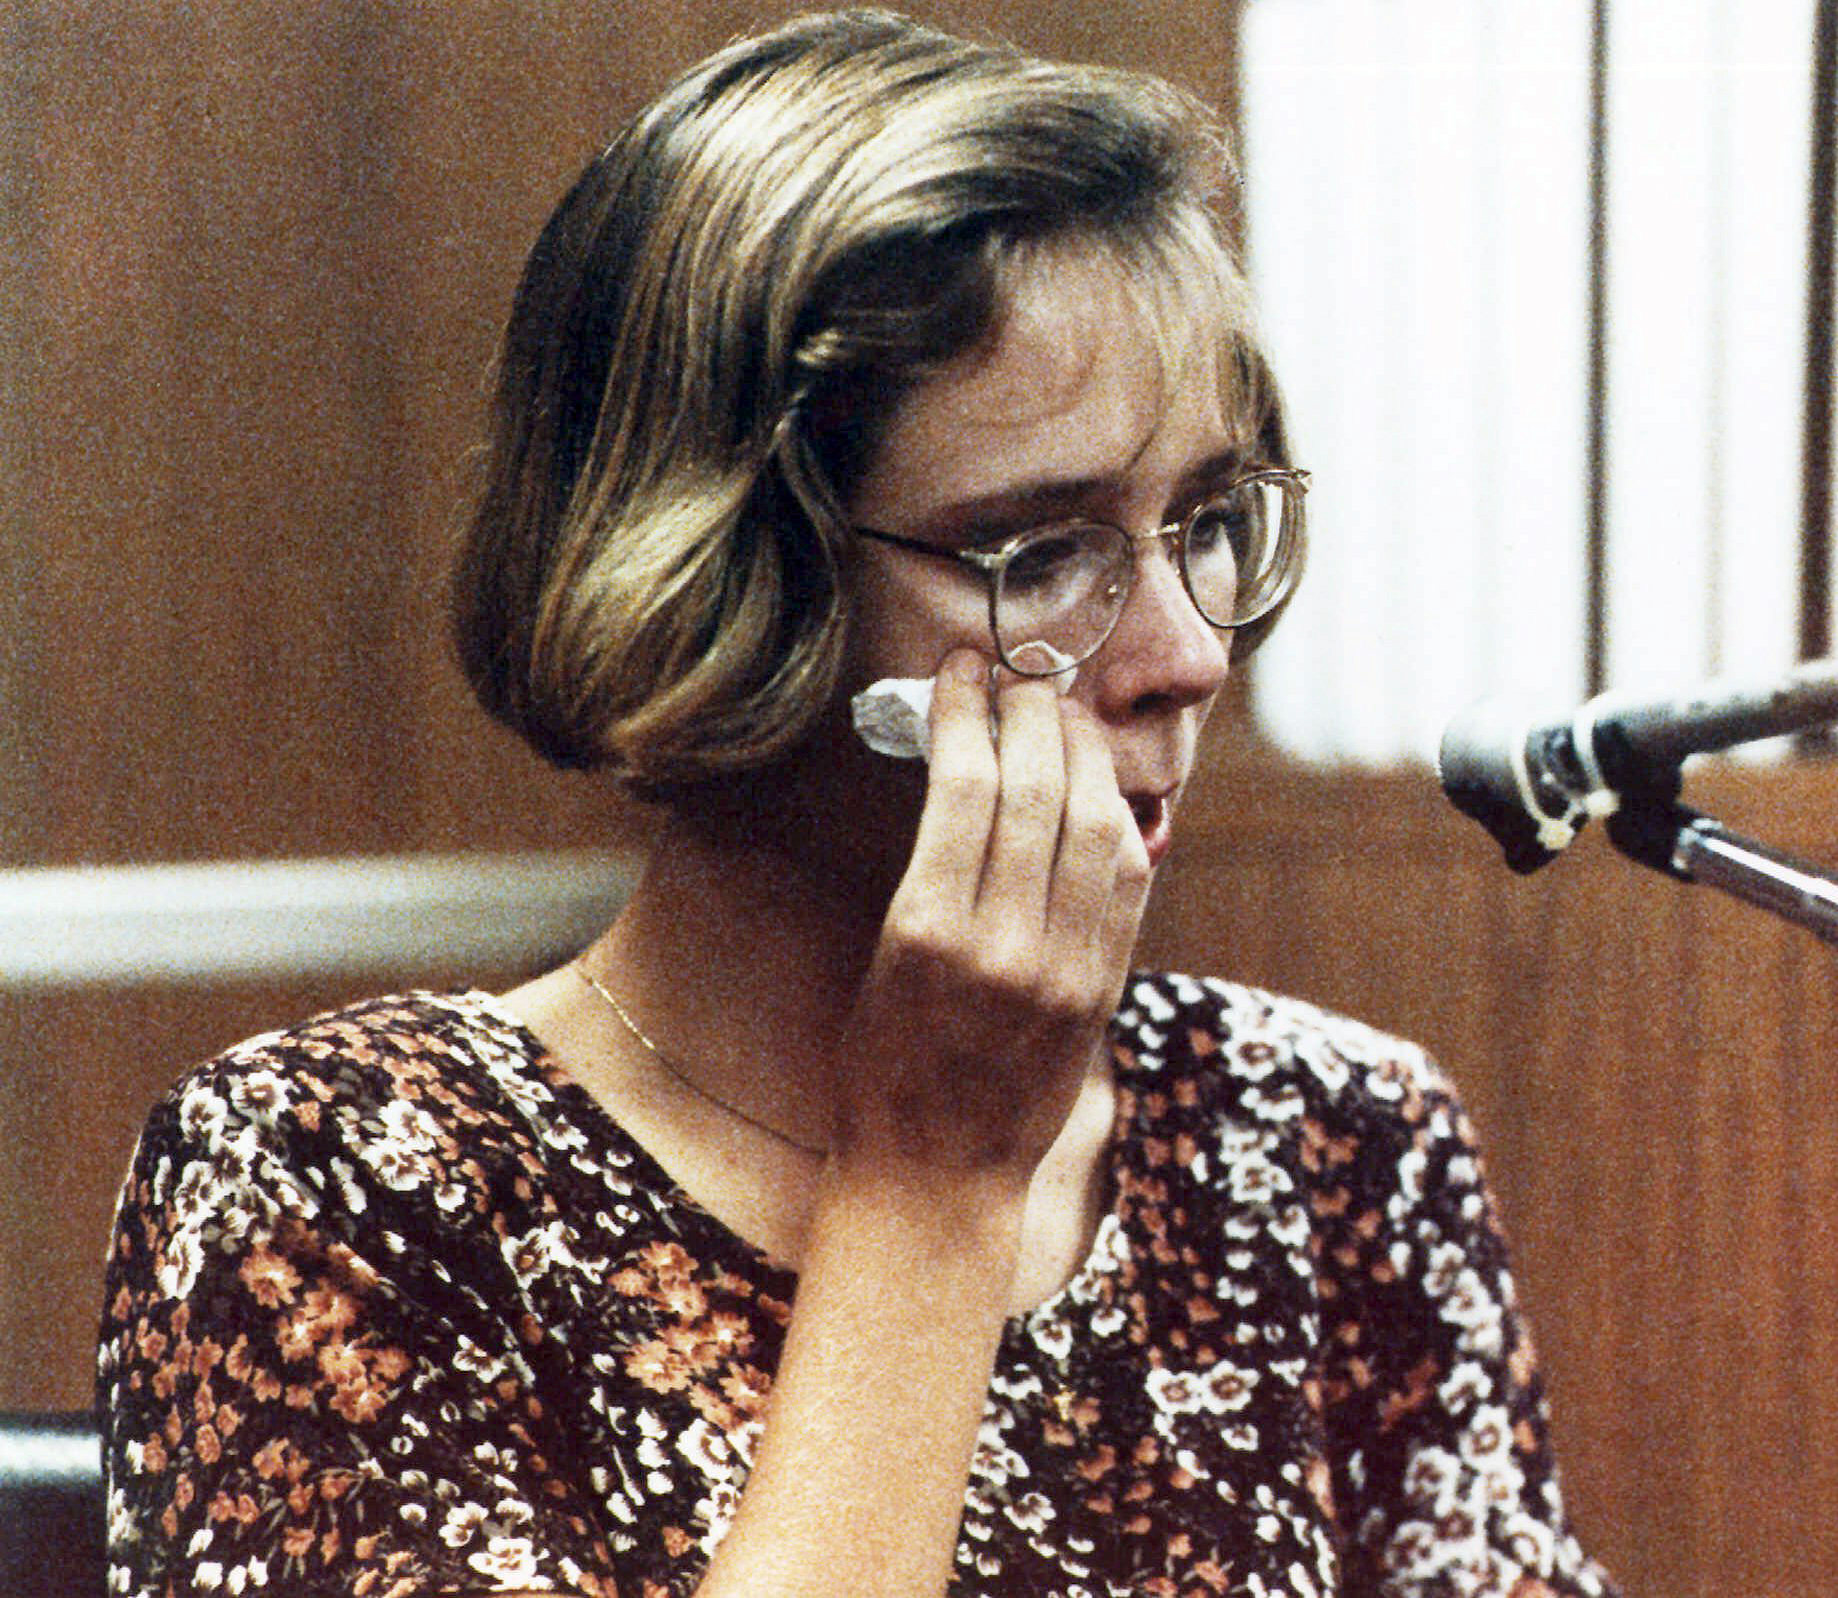 PHOTO: Kimberly Mays, 14, wipes a tear on the witness stand during questioning at her divorce trial to sever ties from her parents in Sarasota, Fla., Aug. 5, 1993.